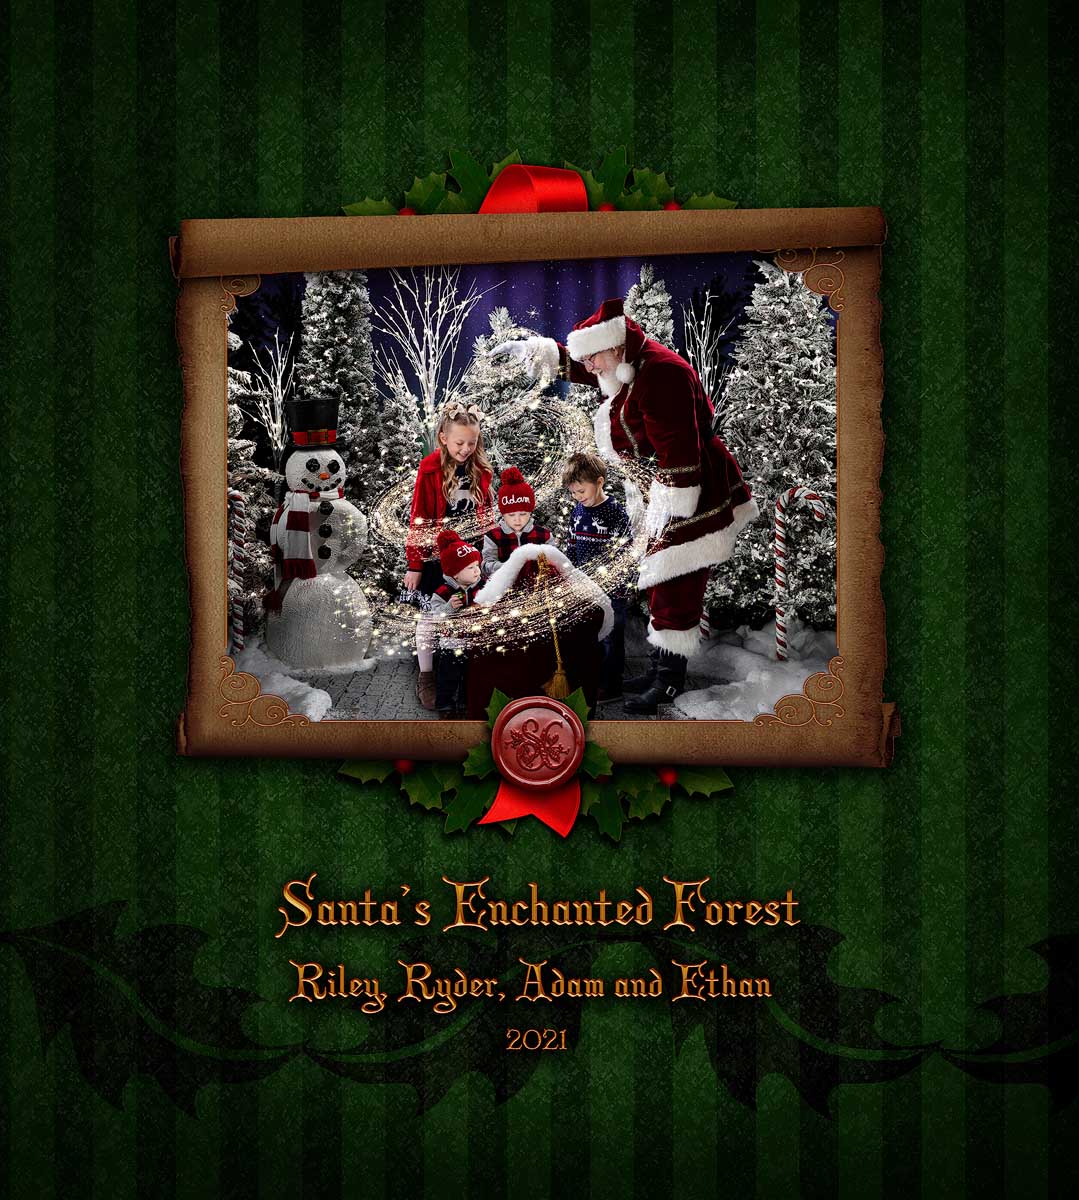 A "Christmas Holly" cover from a 12x12 Heirloom Santa Storybook created at The Best Santa Experience.